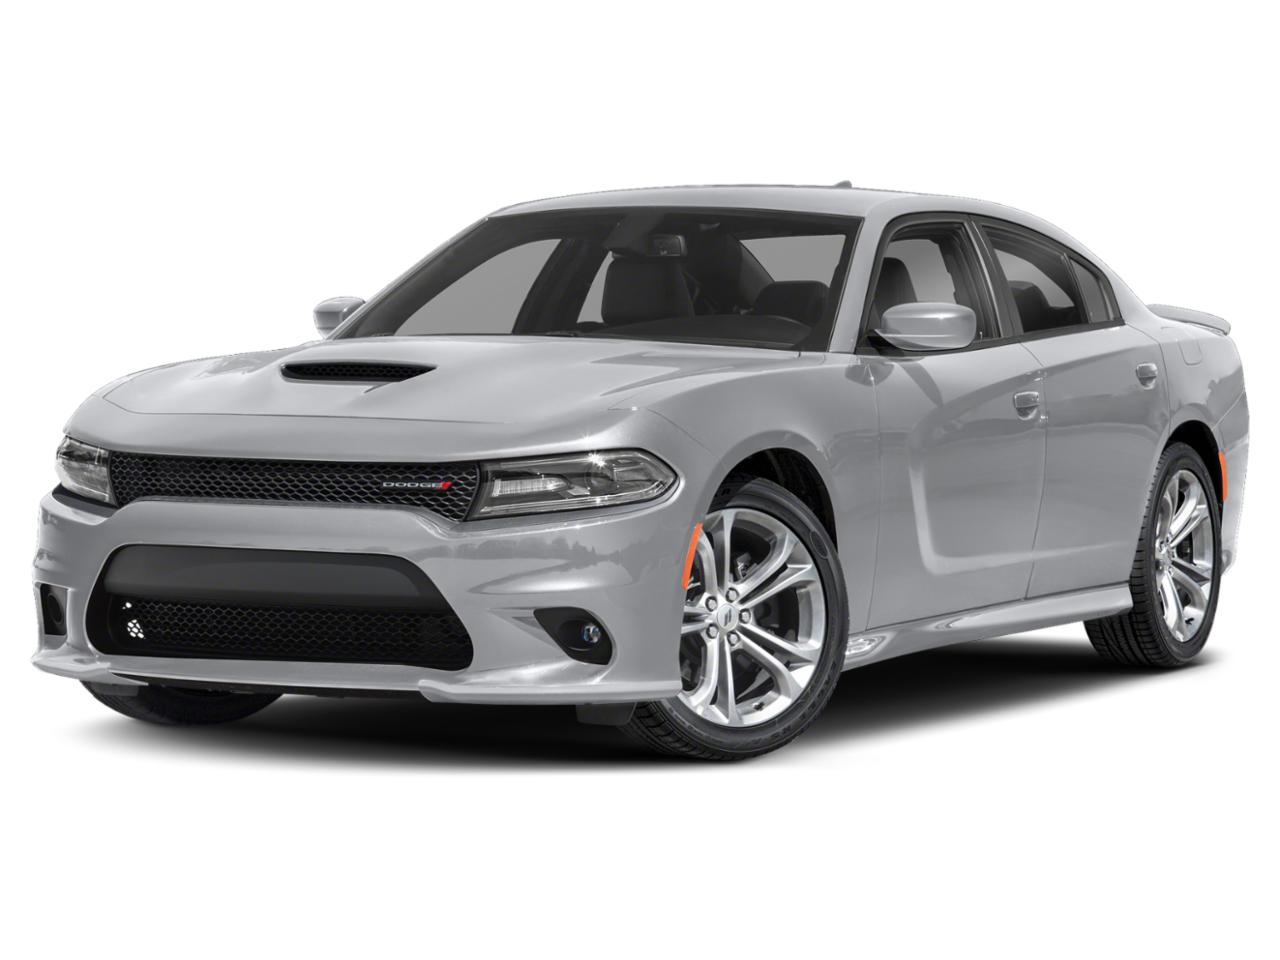 2021 Dodge Charger Vehicle Photo in St. Petersburg, FL 33713